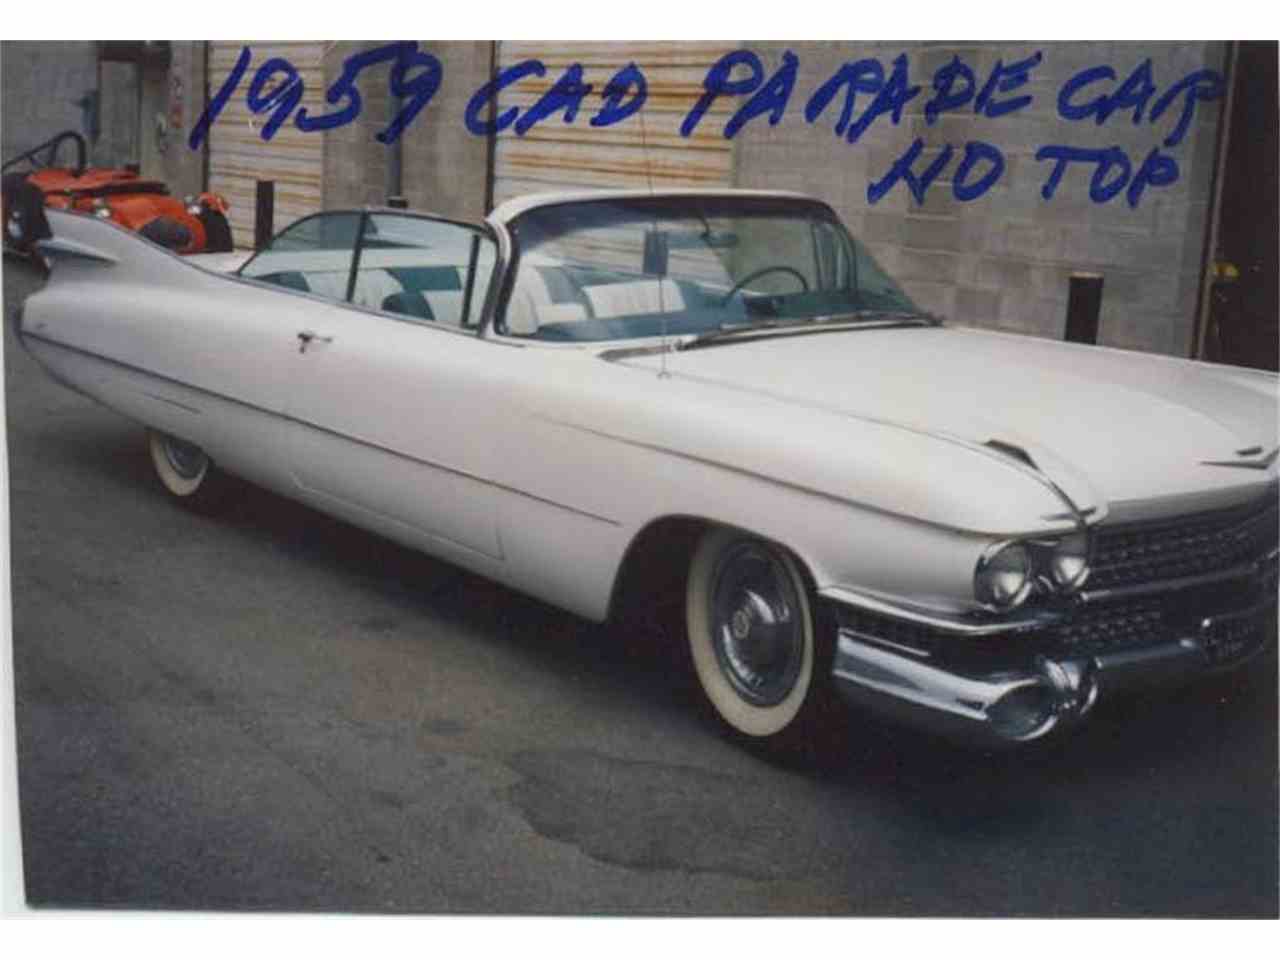 1959 Cadillac Coupe Deville High Quality Background on Wallpapers Vista